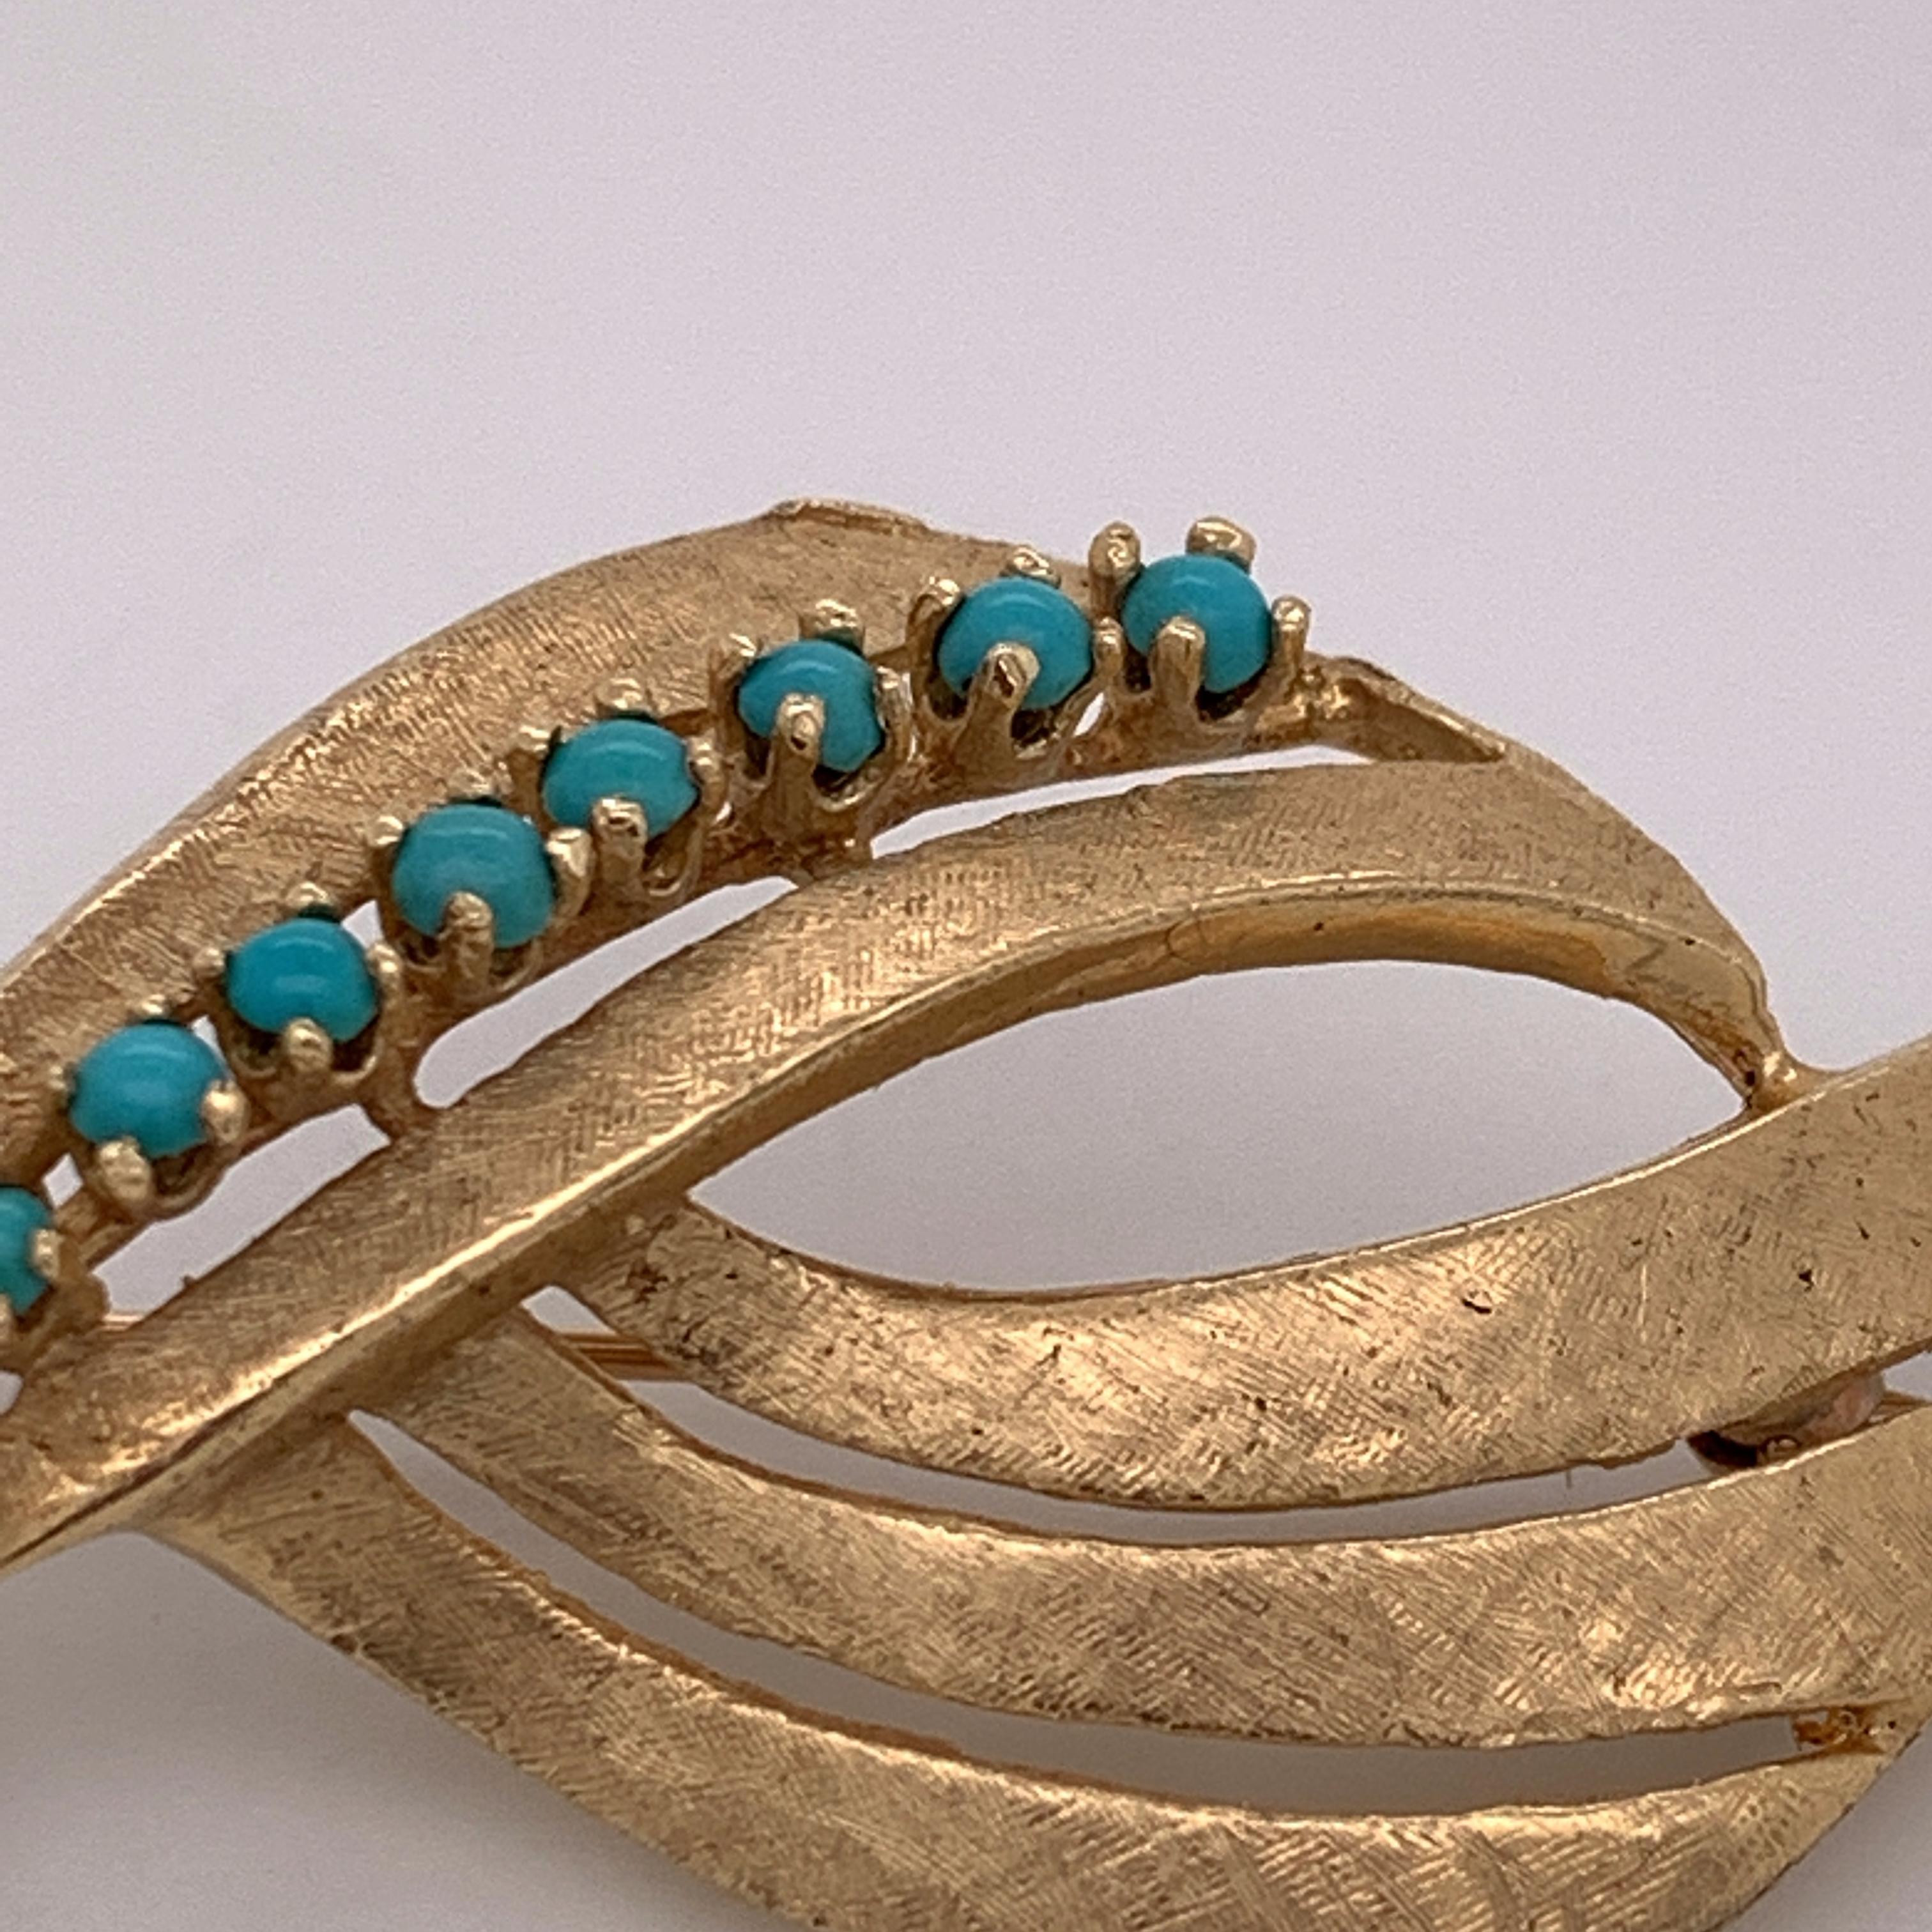 Art Nouveau 14 Karat Yellow Gold Ribbon Pin With Turquoise Accents